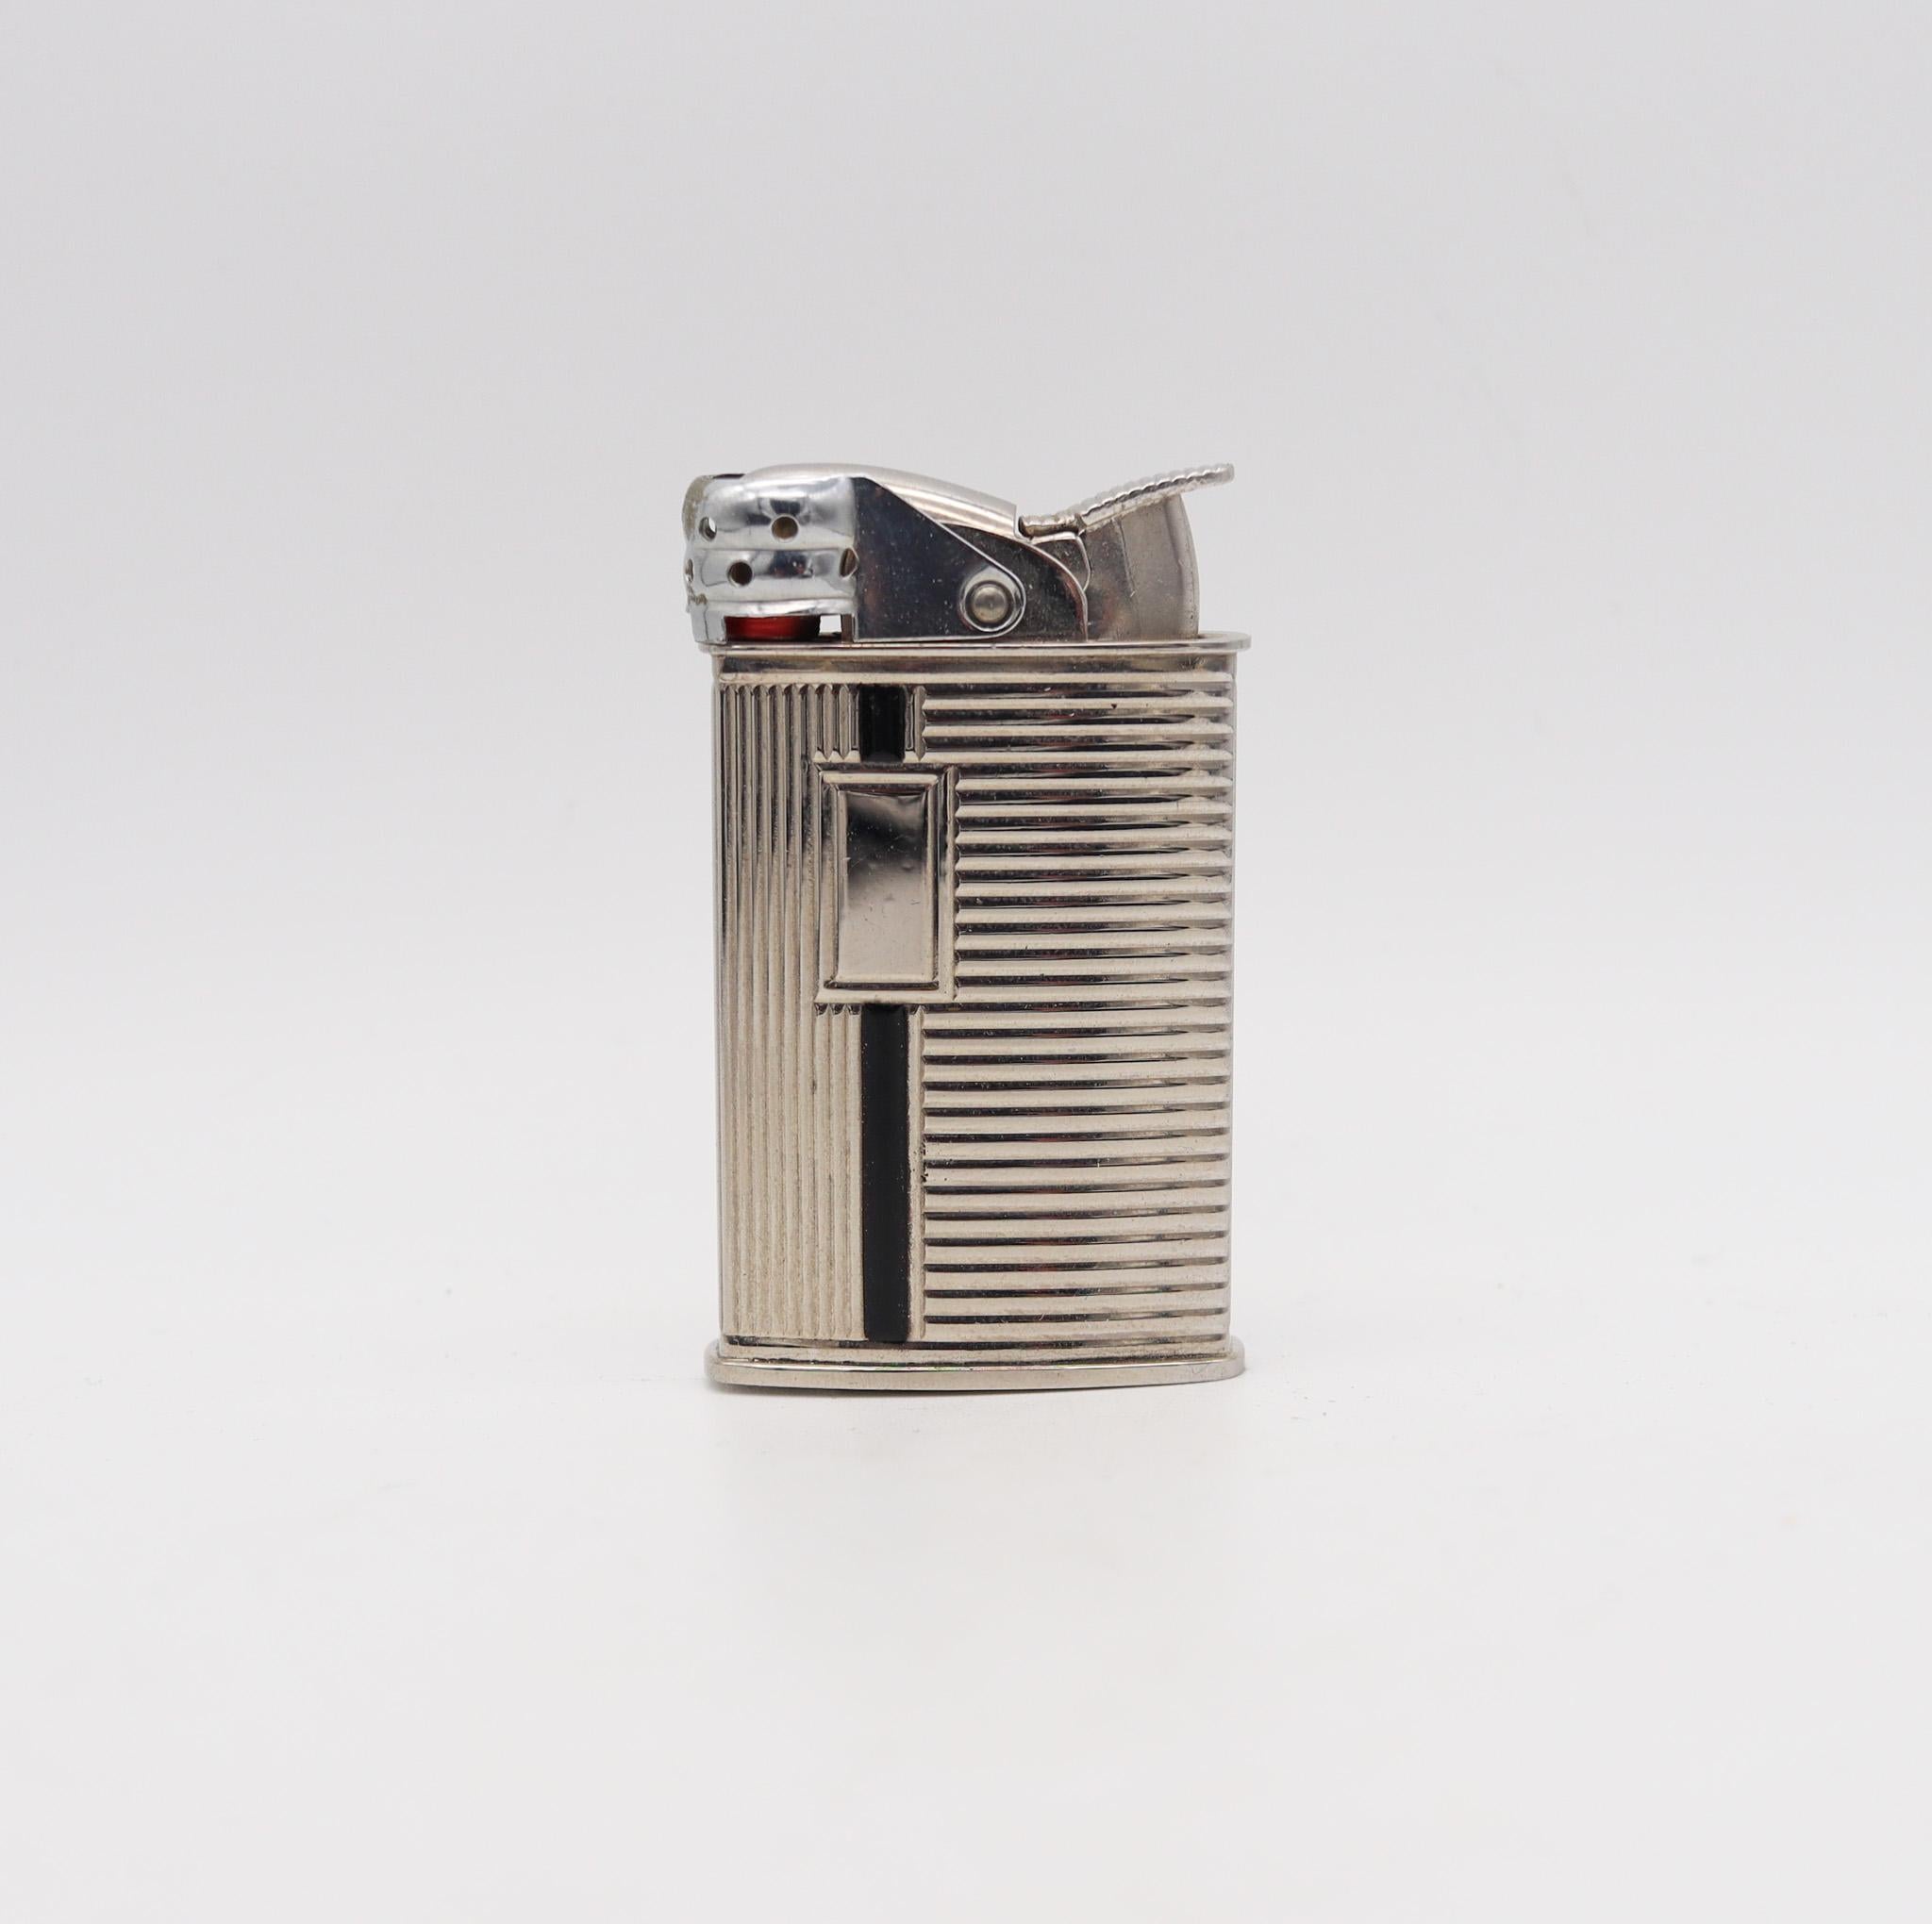 Spitfire pocket lighter designed by Evans.

Rare automatic spitfire pocket lighter, created in America by the Evans Company, back in the 1940. This very handsome piece has been crafted with deco-modernist patterns in chromed steel with accents